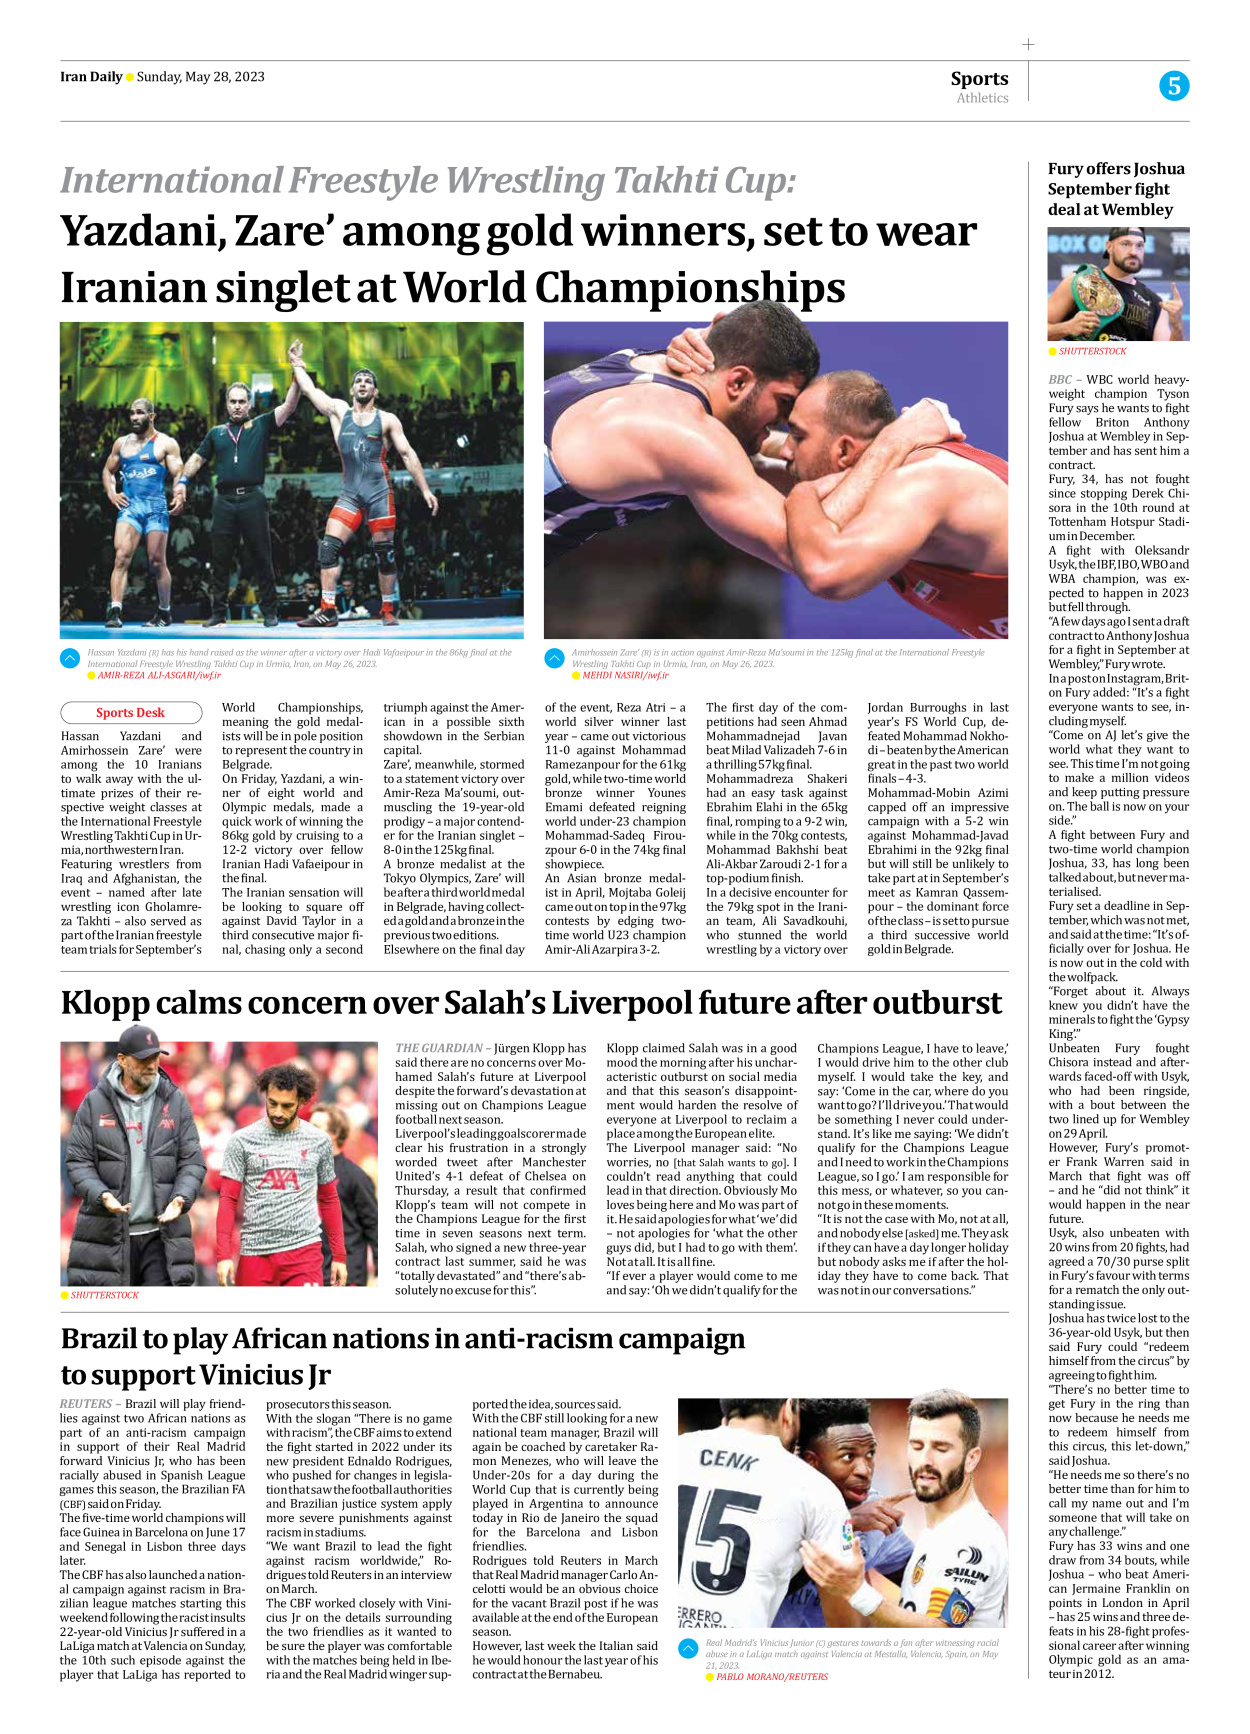 Iran Daily - Number Seven Thousand Three Hundred and Two - 28 May 2023 - Page 5